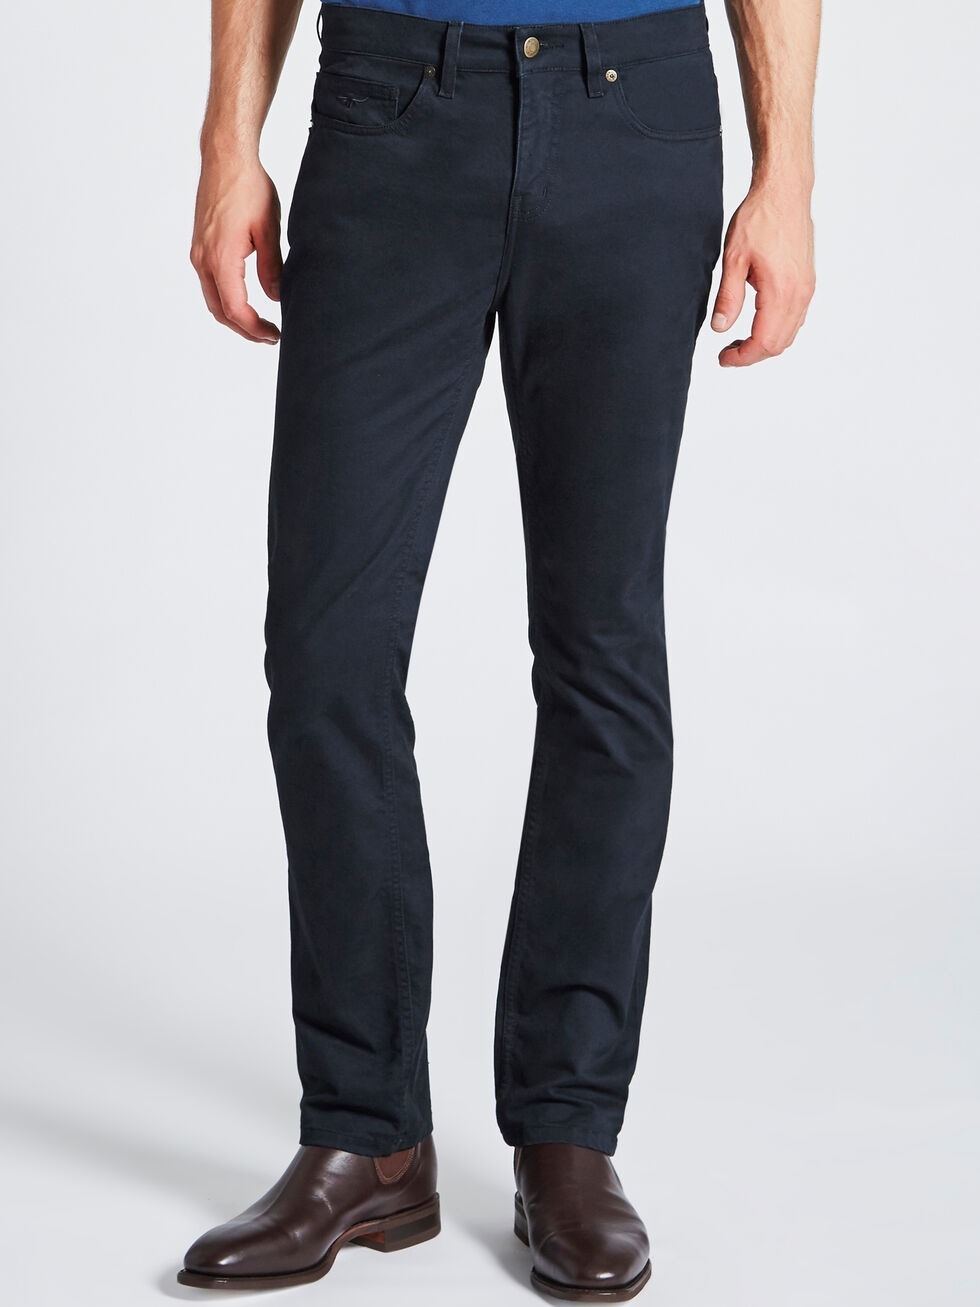 RM Williams Ramco Jeans Navy | Port Phillip Shop